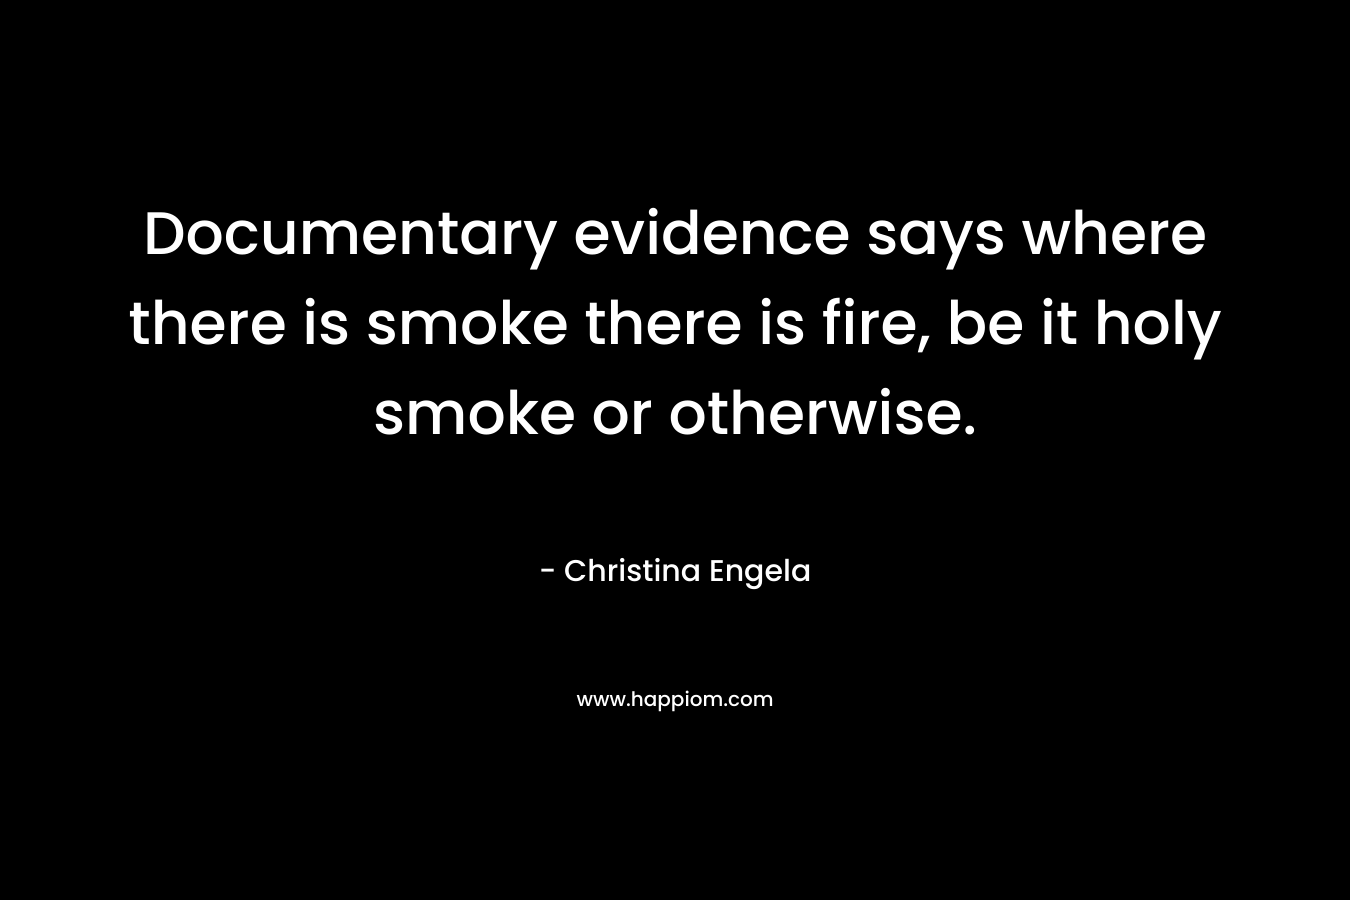 Documentary evidence says where there is smoke there is fire, be it holy smoke or otherwise.